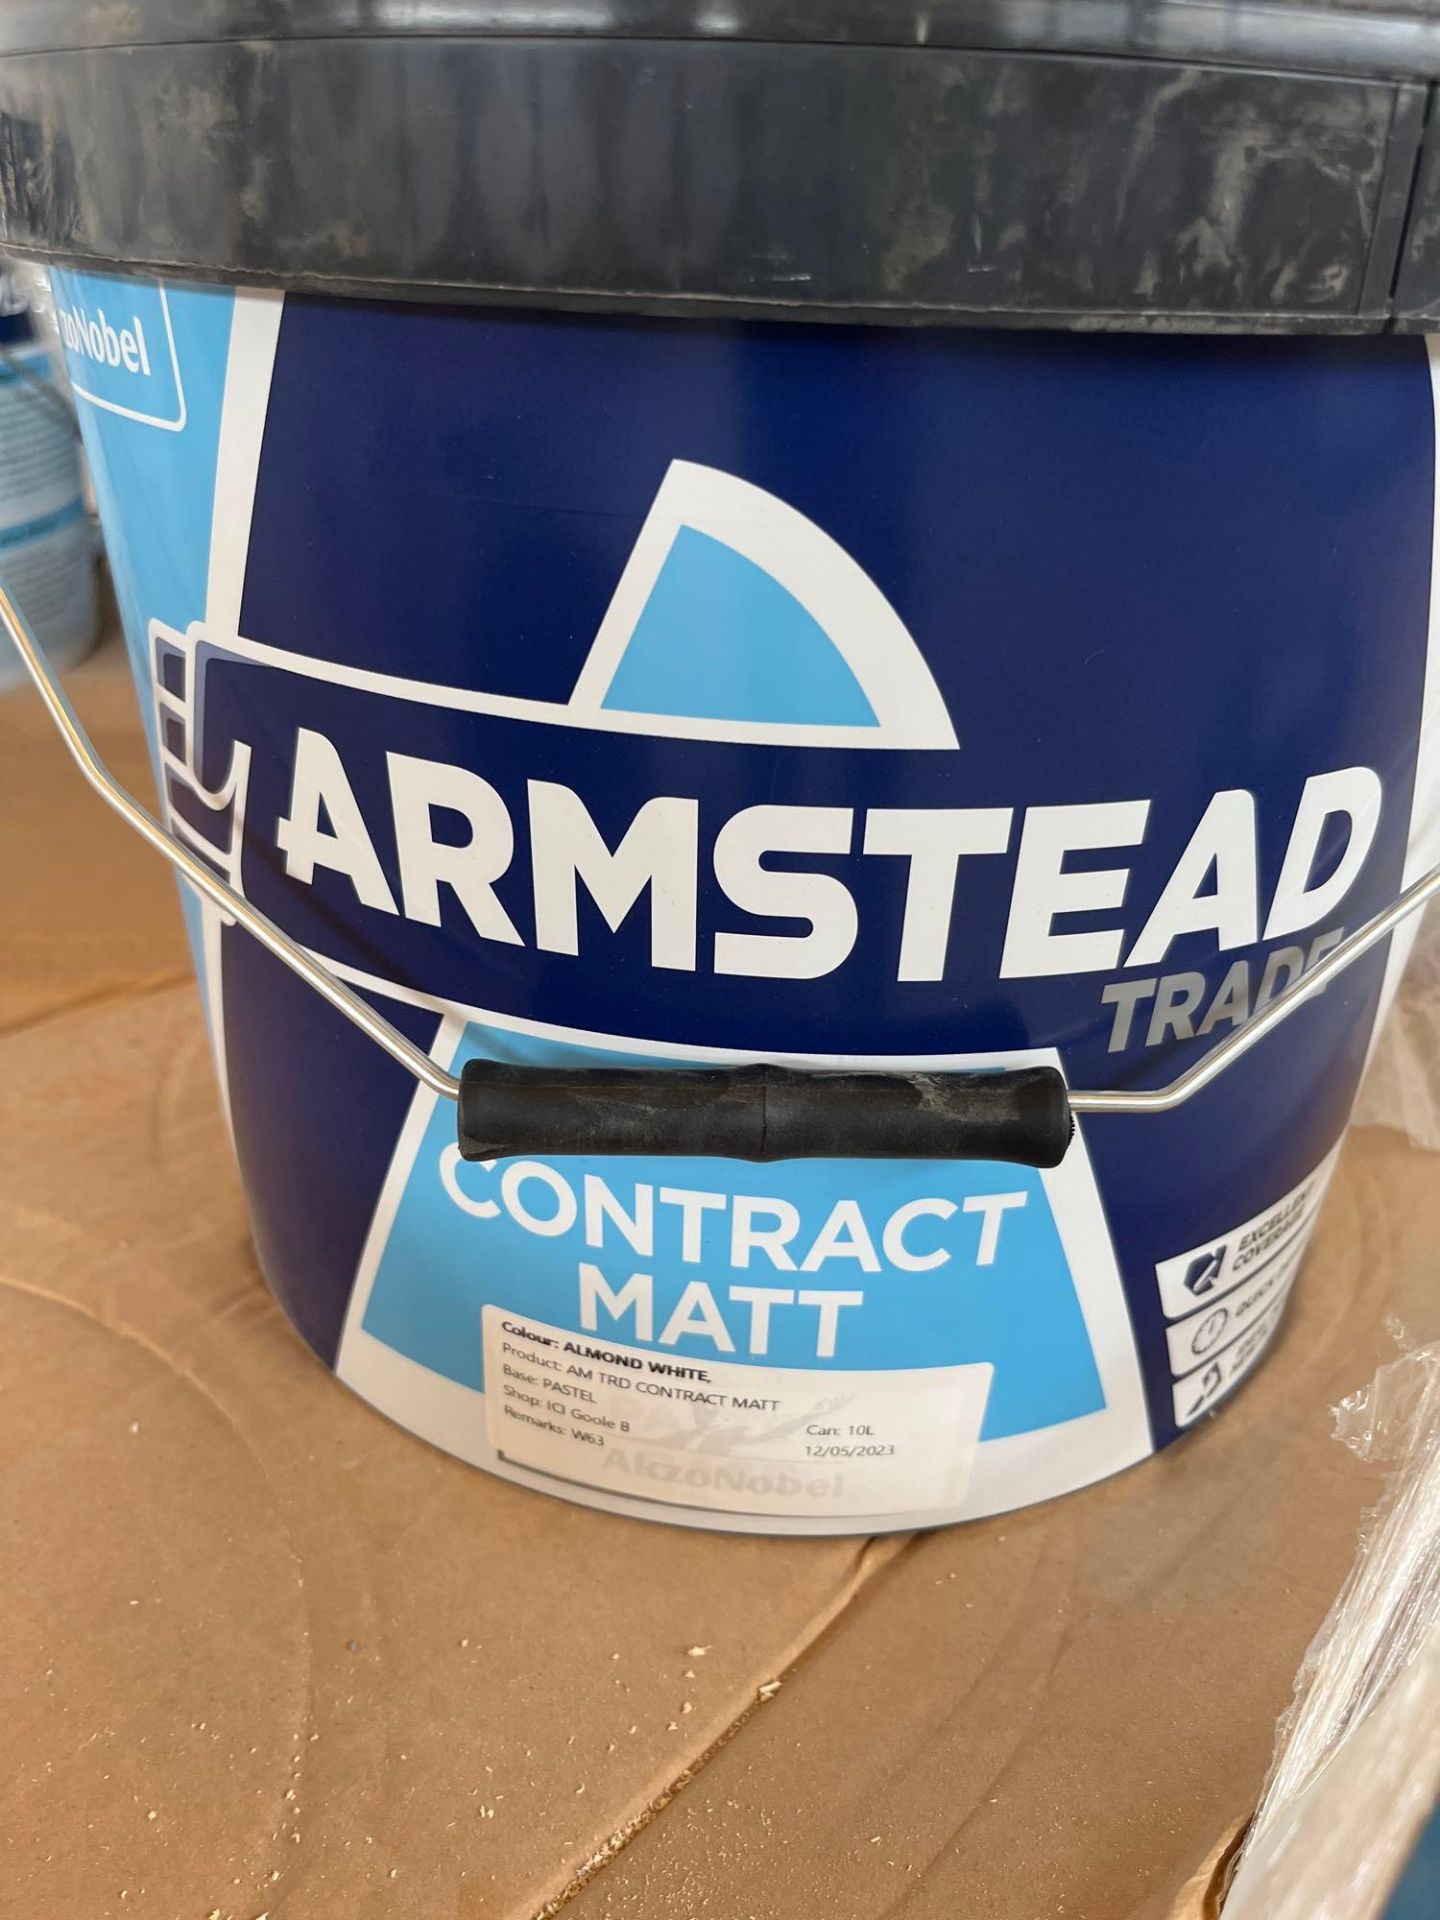 38 10L Tubs of Armstead Contract Matt Emulsion - Image 2 of 3